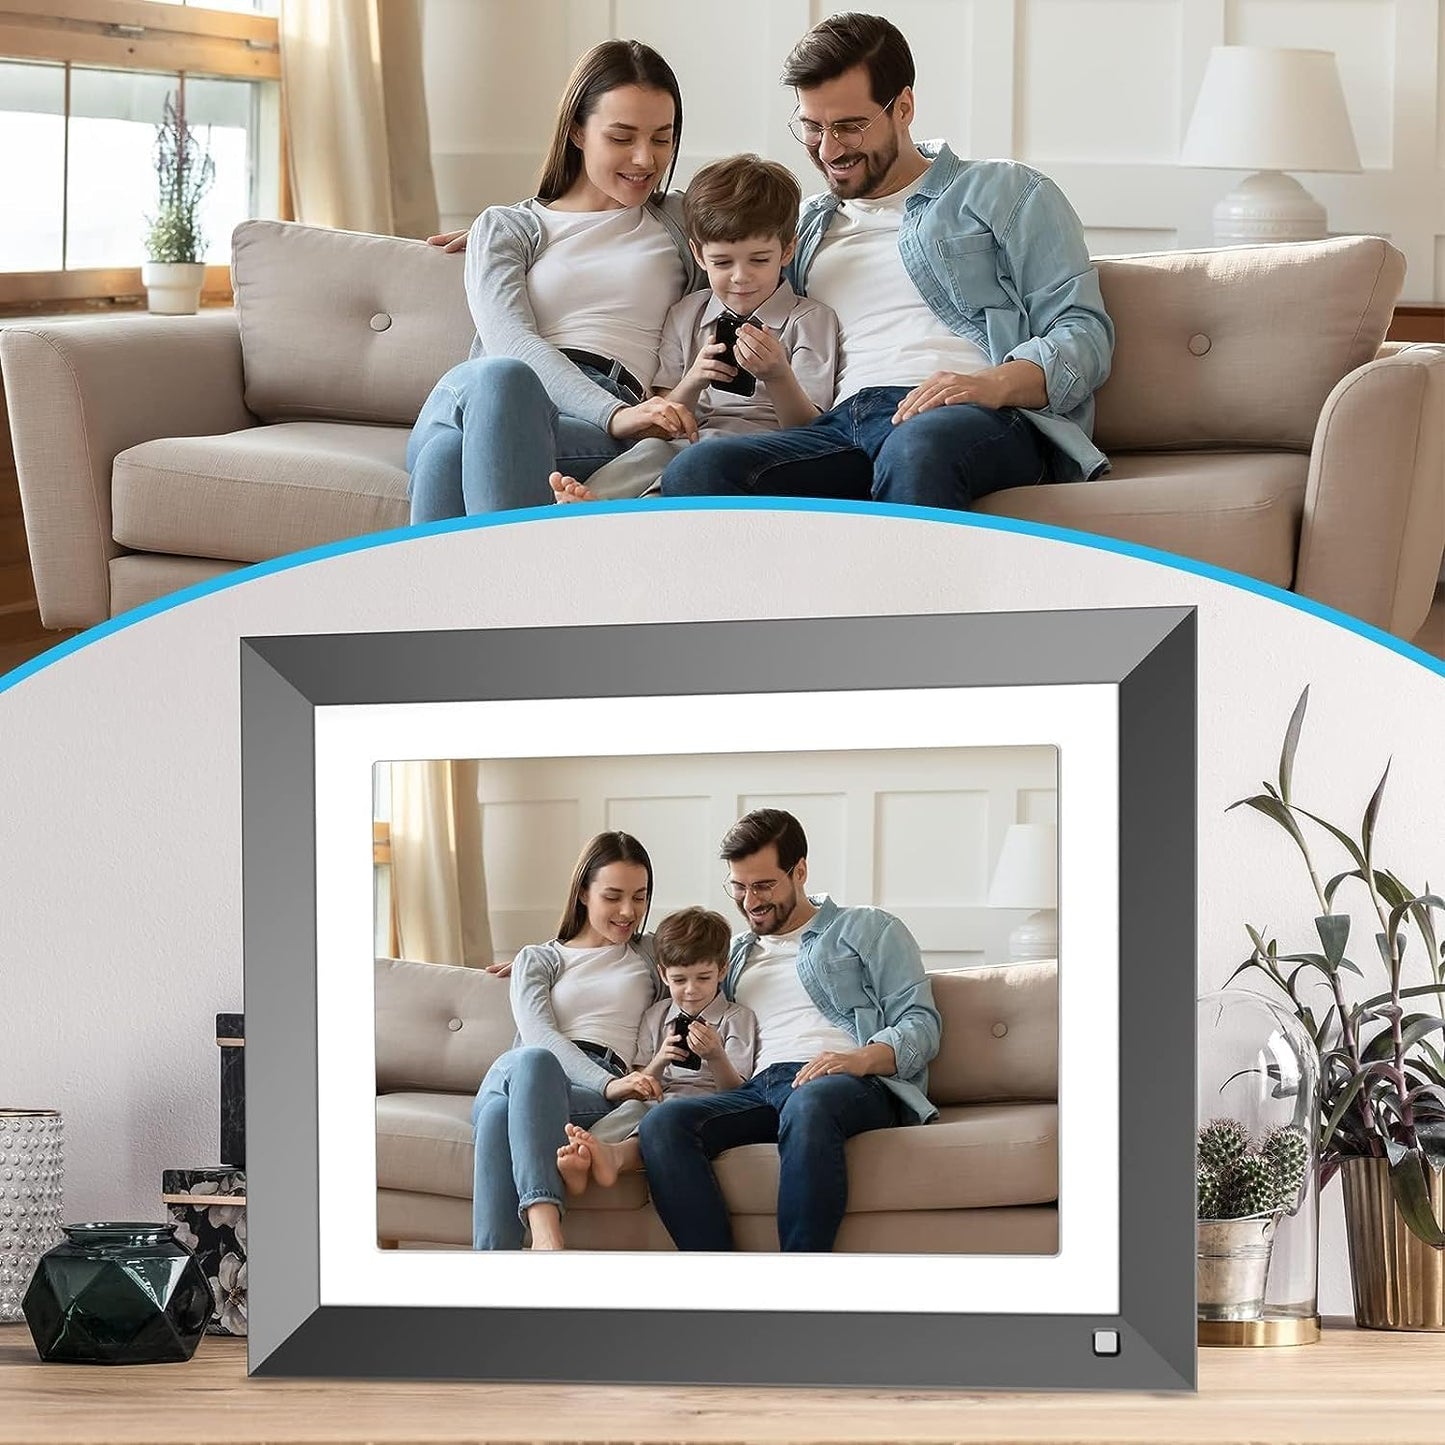 11-inch Smart Digital Photo Frame - FULLJA 32GB Dual-WiFi 2K Digital Picture Frame, Motion Sensor, Full Function, Simply Sharing Photos and Videos via App/Email, Unlimited Cloud Storage